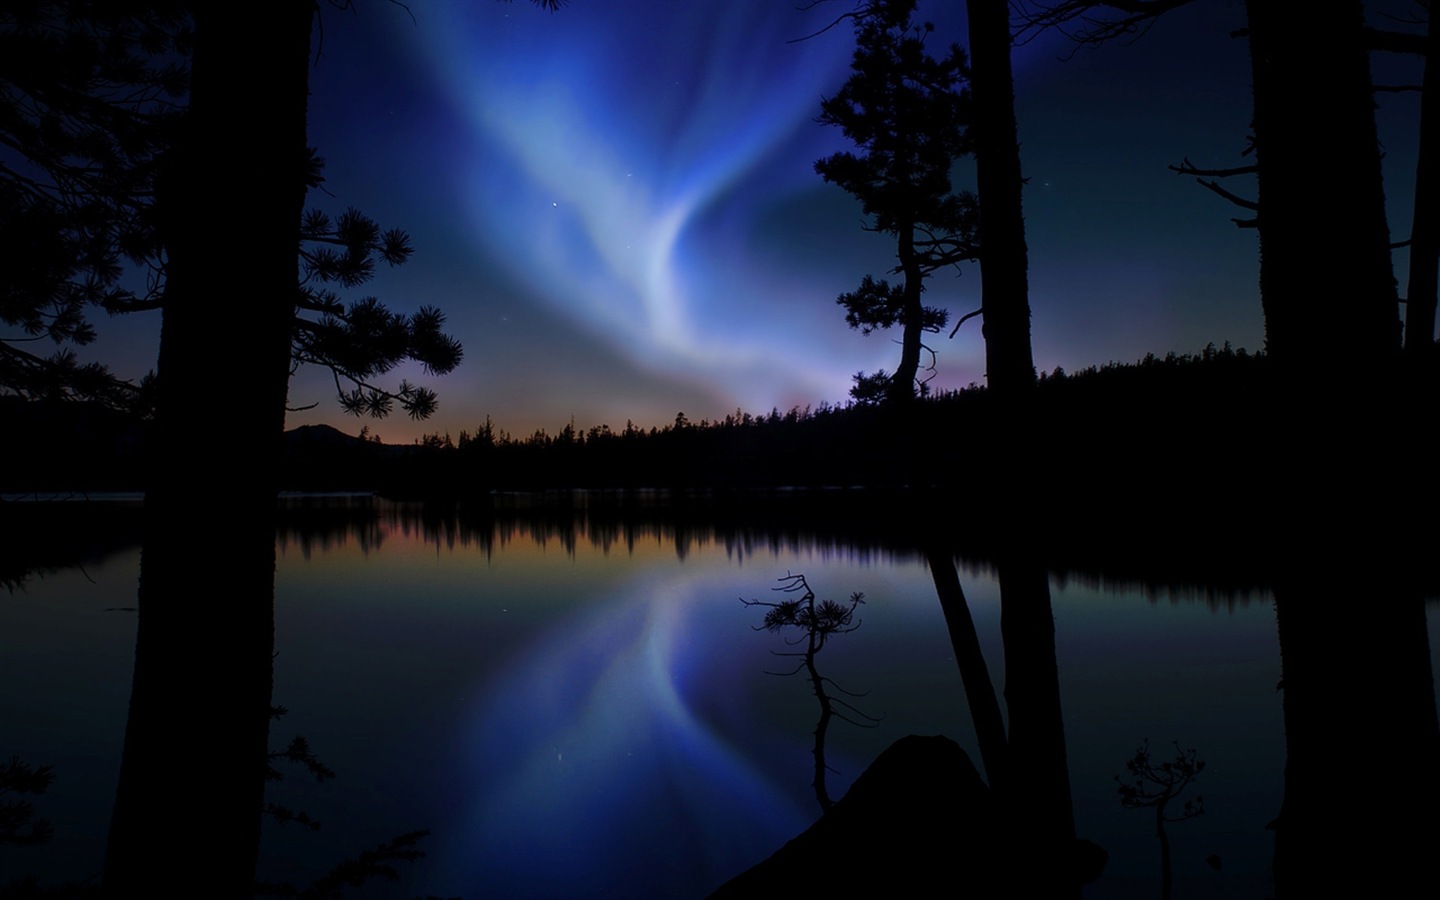 Natural wonders of the Northern Lights HD Wallpaper (1) #11 - 1440x900